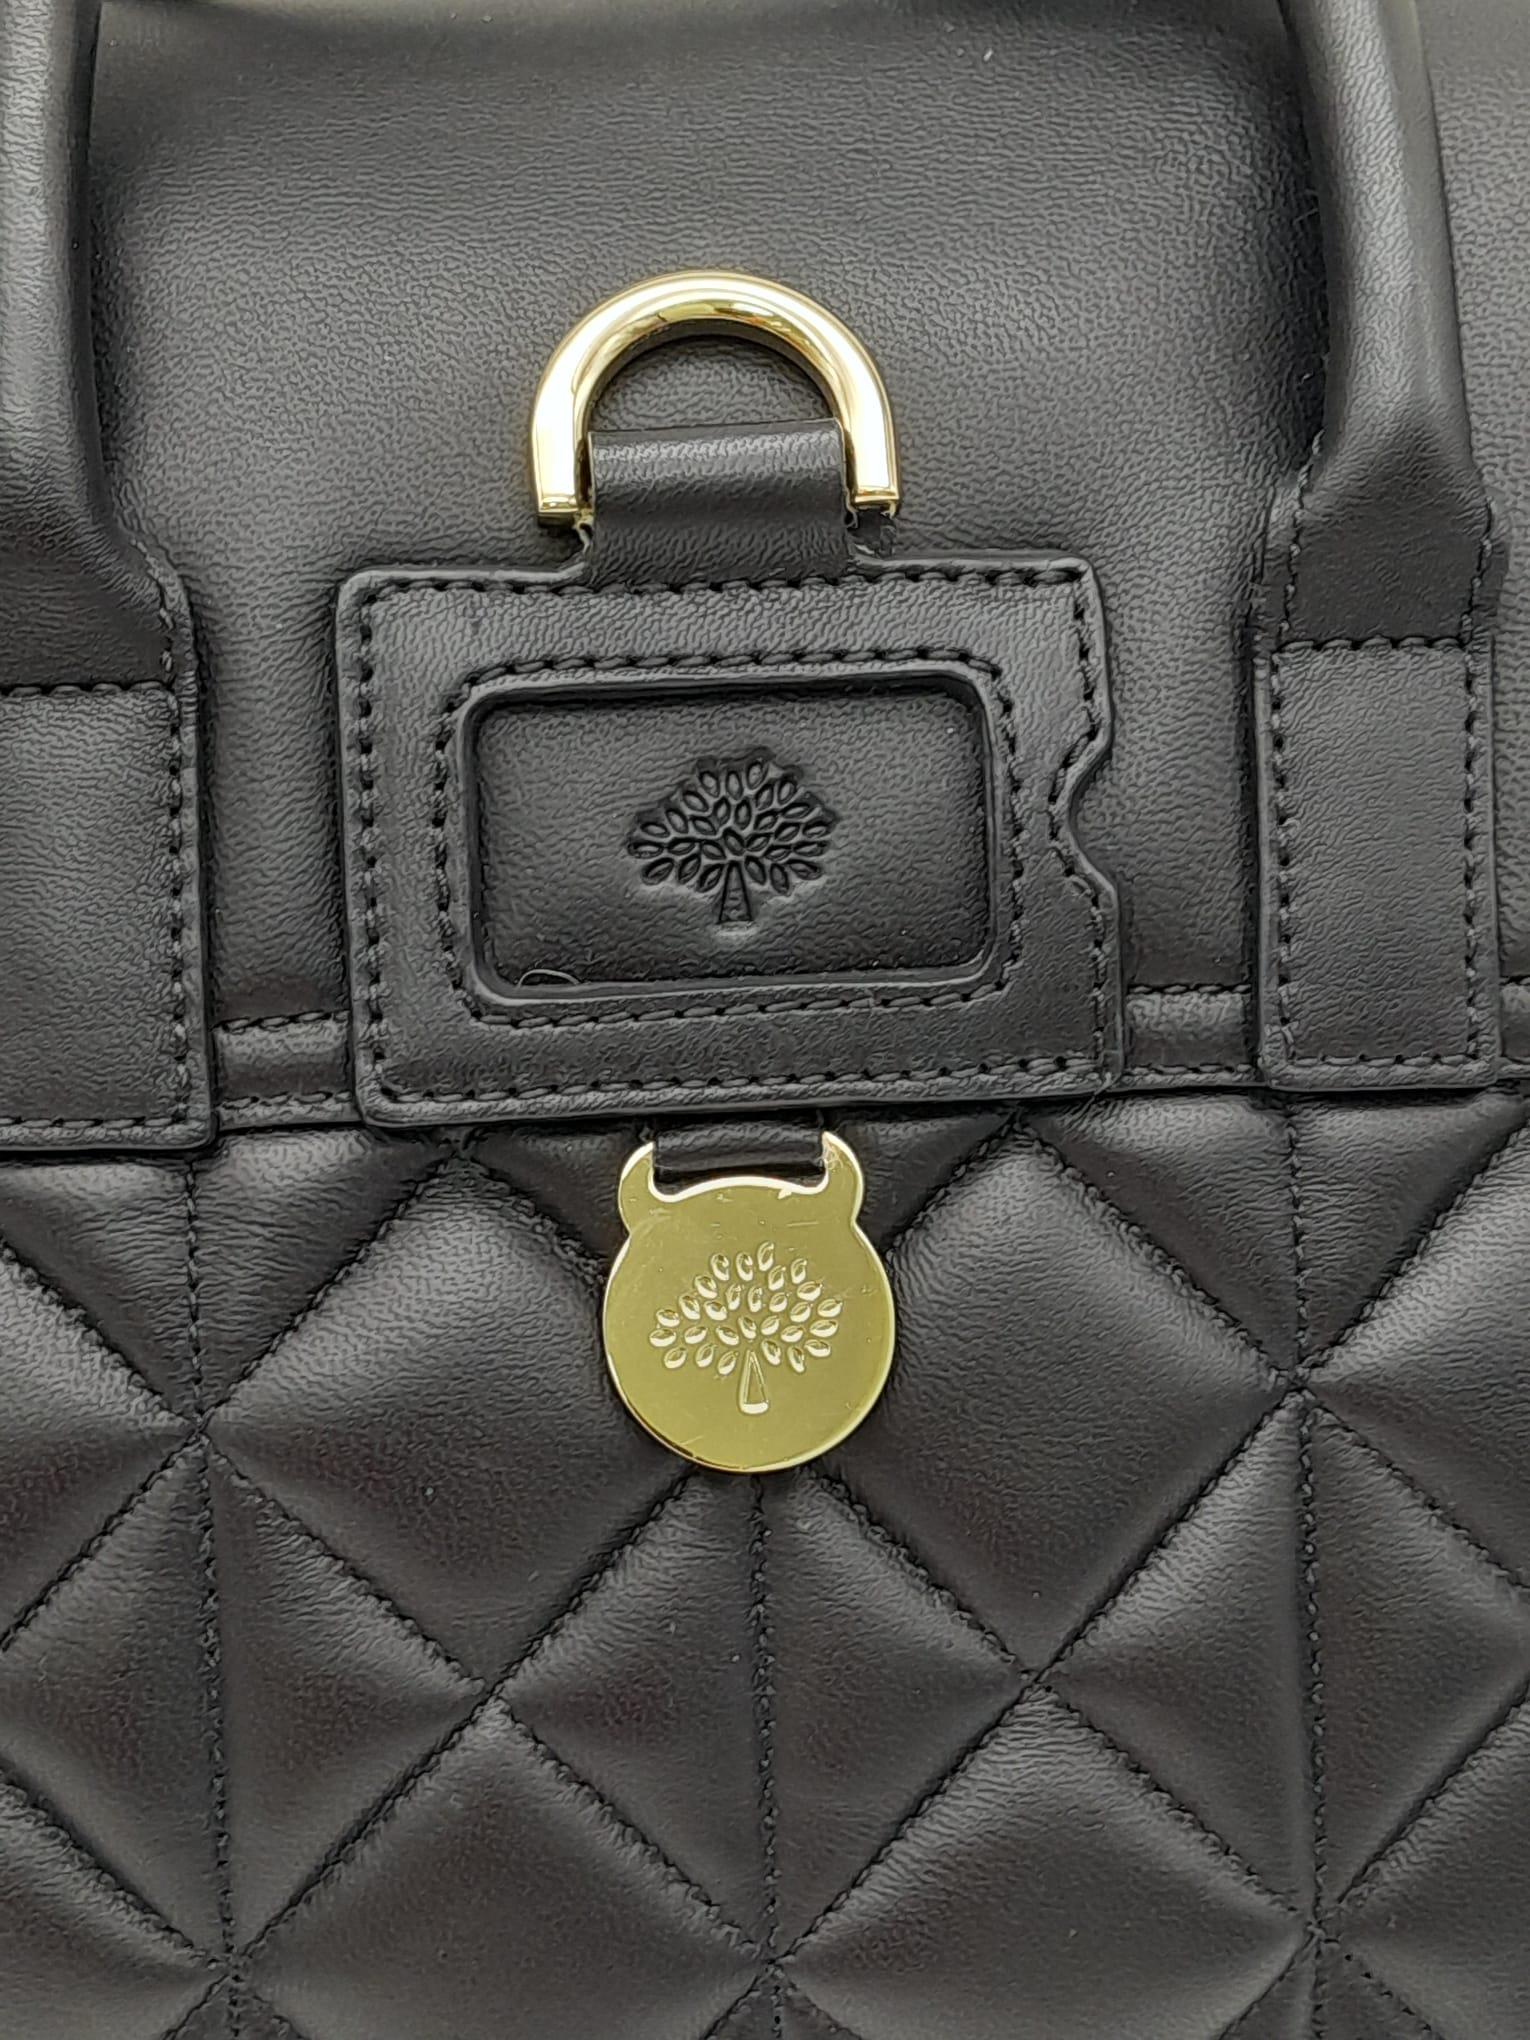 Mulberry Black Quilted Leather Cara Delevingne Convertible Bag. Versatile in design, it comes with - Image 11 of 11